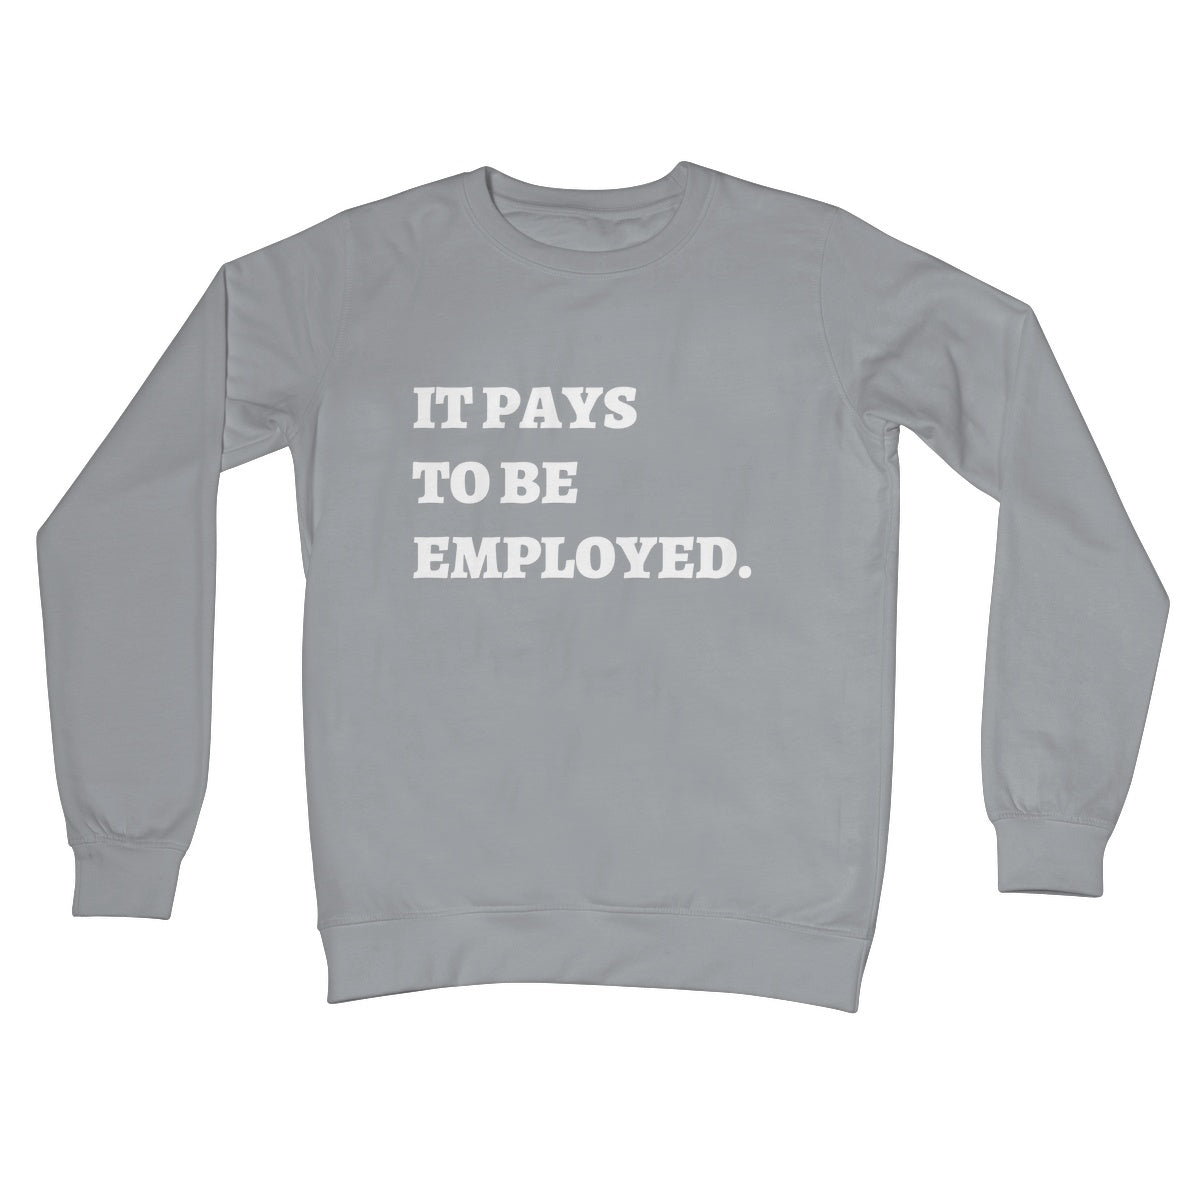 it pays to be employed jumper grey